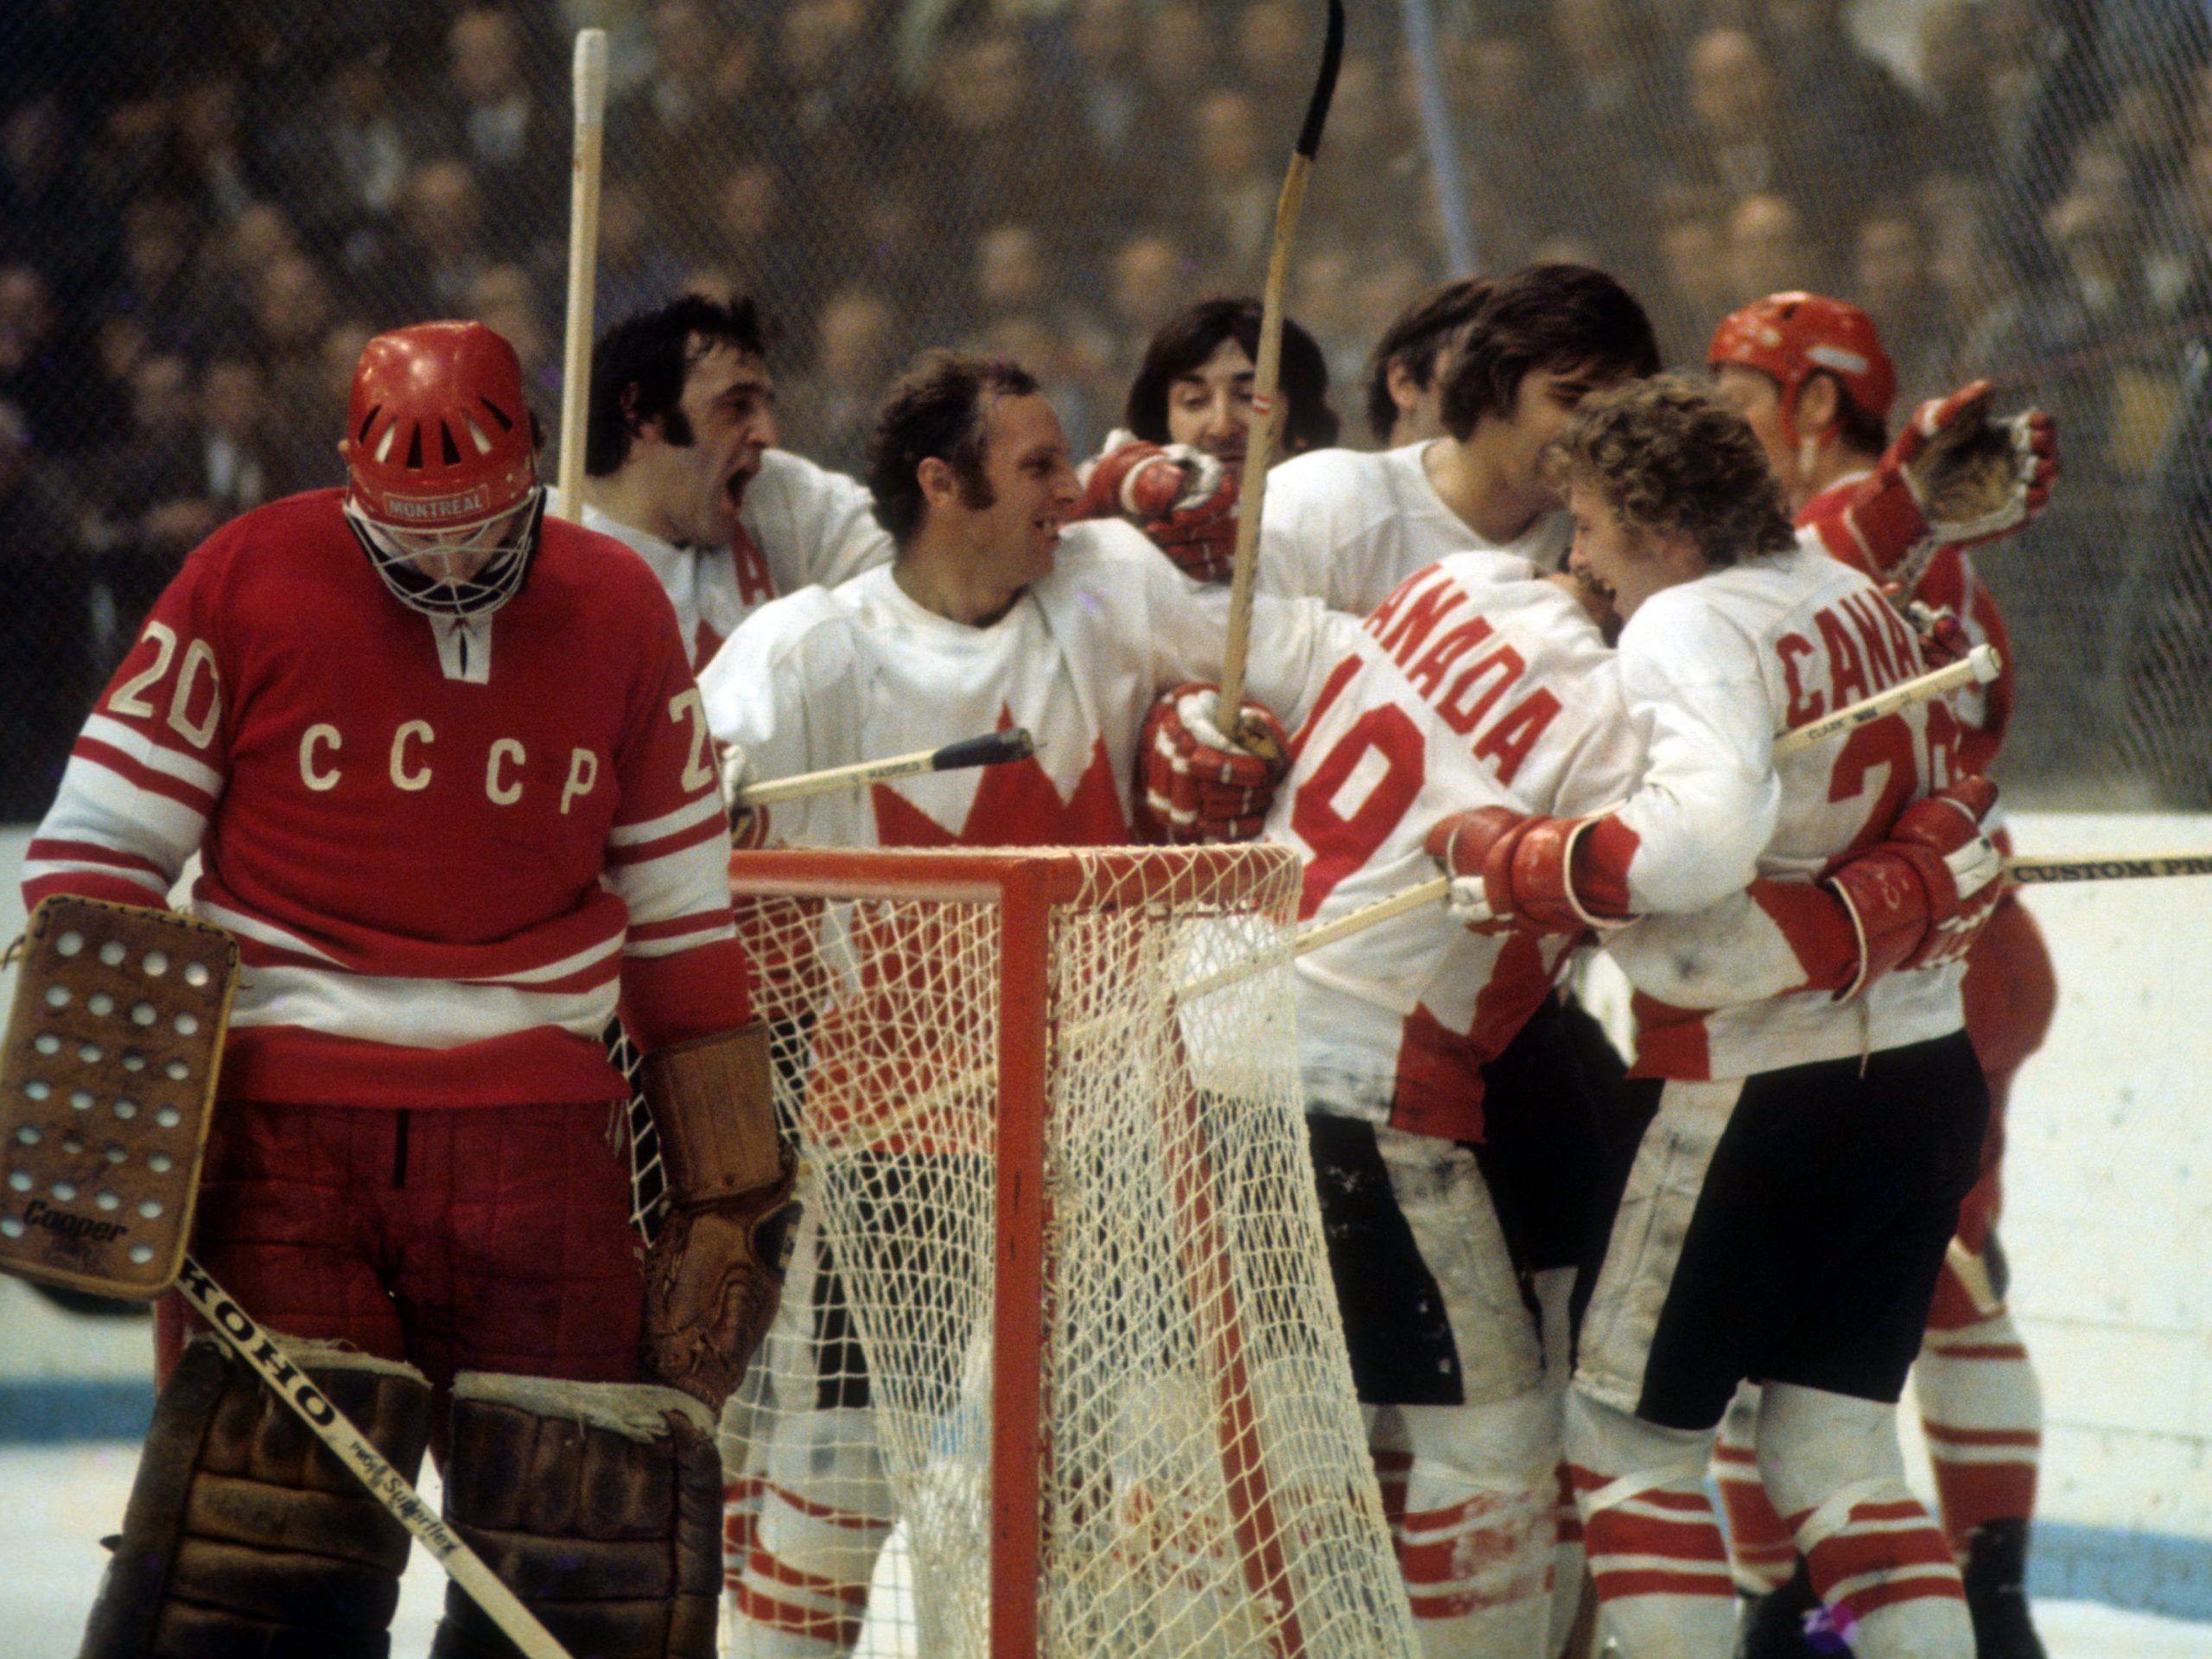 1972 Hockey Summit: 50 years ago a single goal brought Canadians together  in a moment of perfect joy